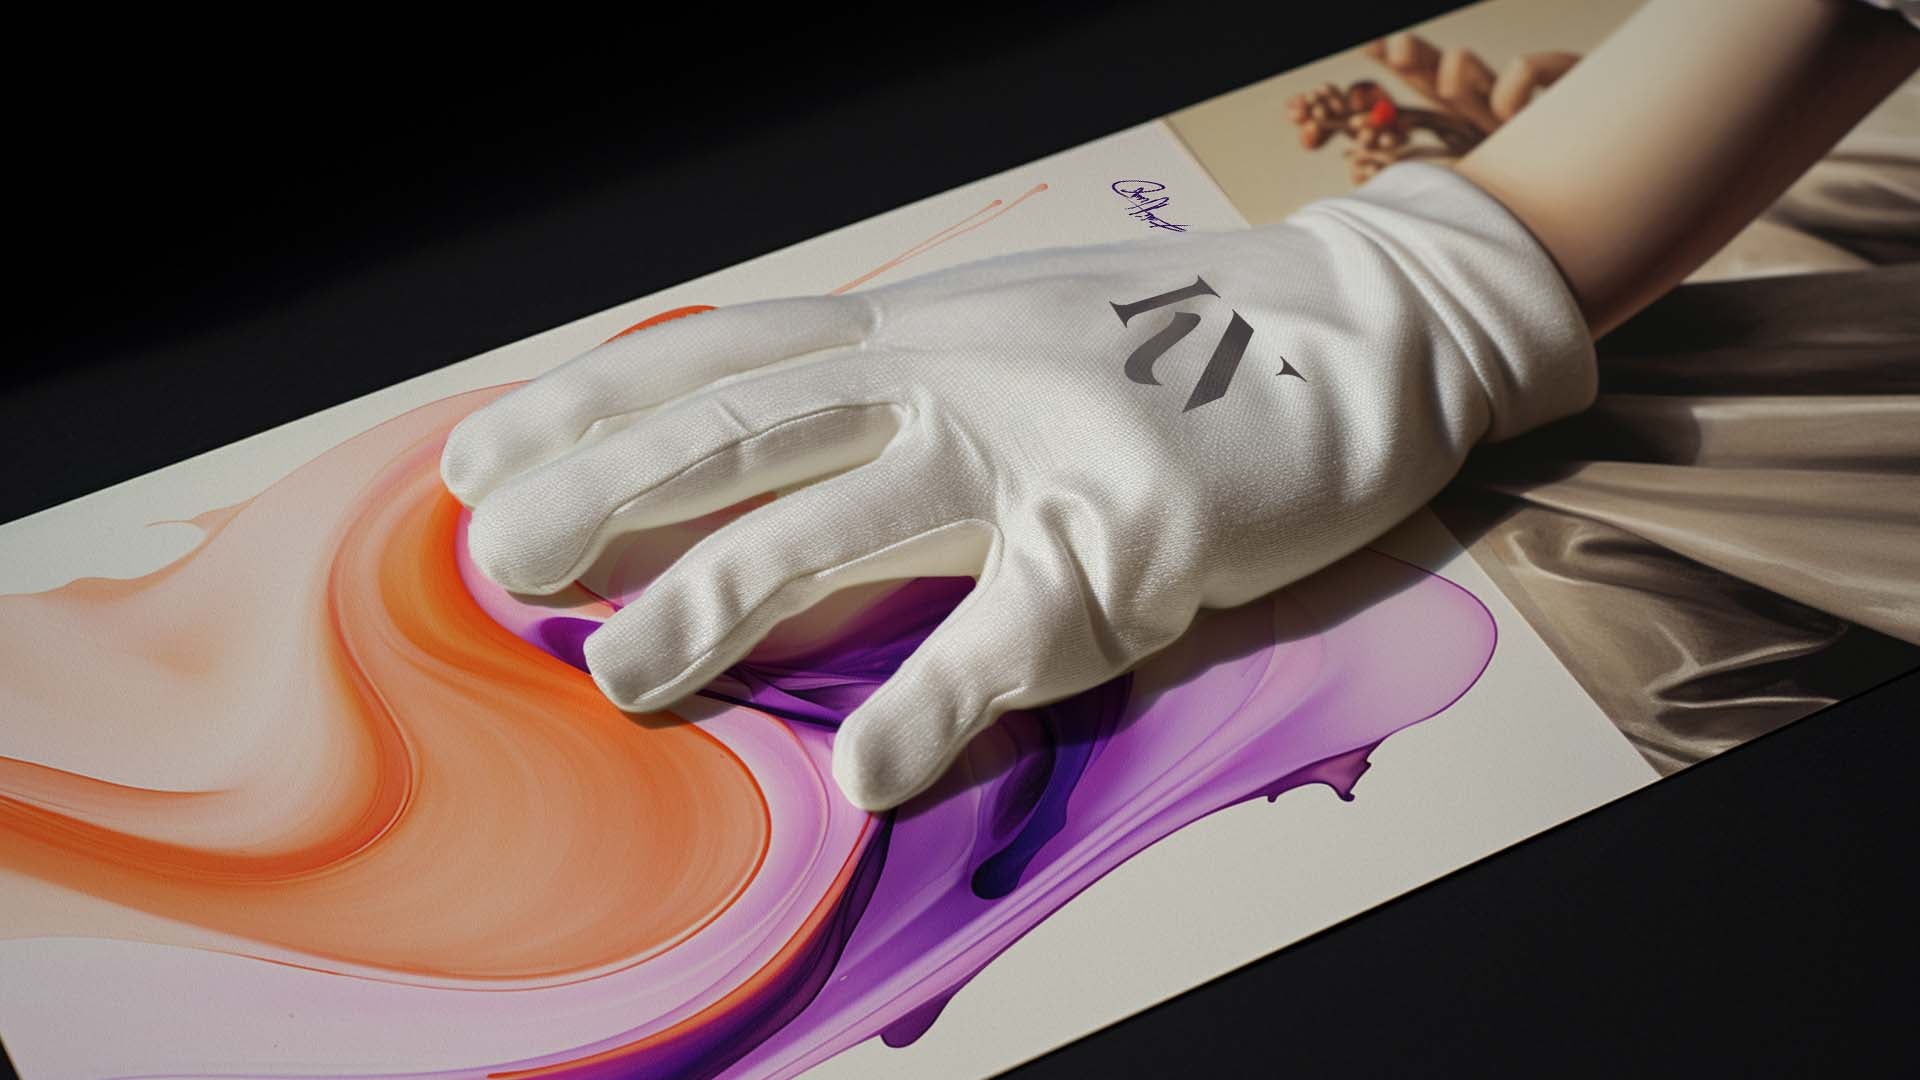 Purple and orange abstract art painting printed on high quality paper, with a soft touch of gloves.